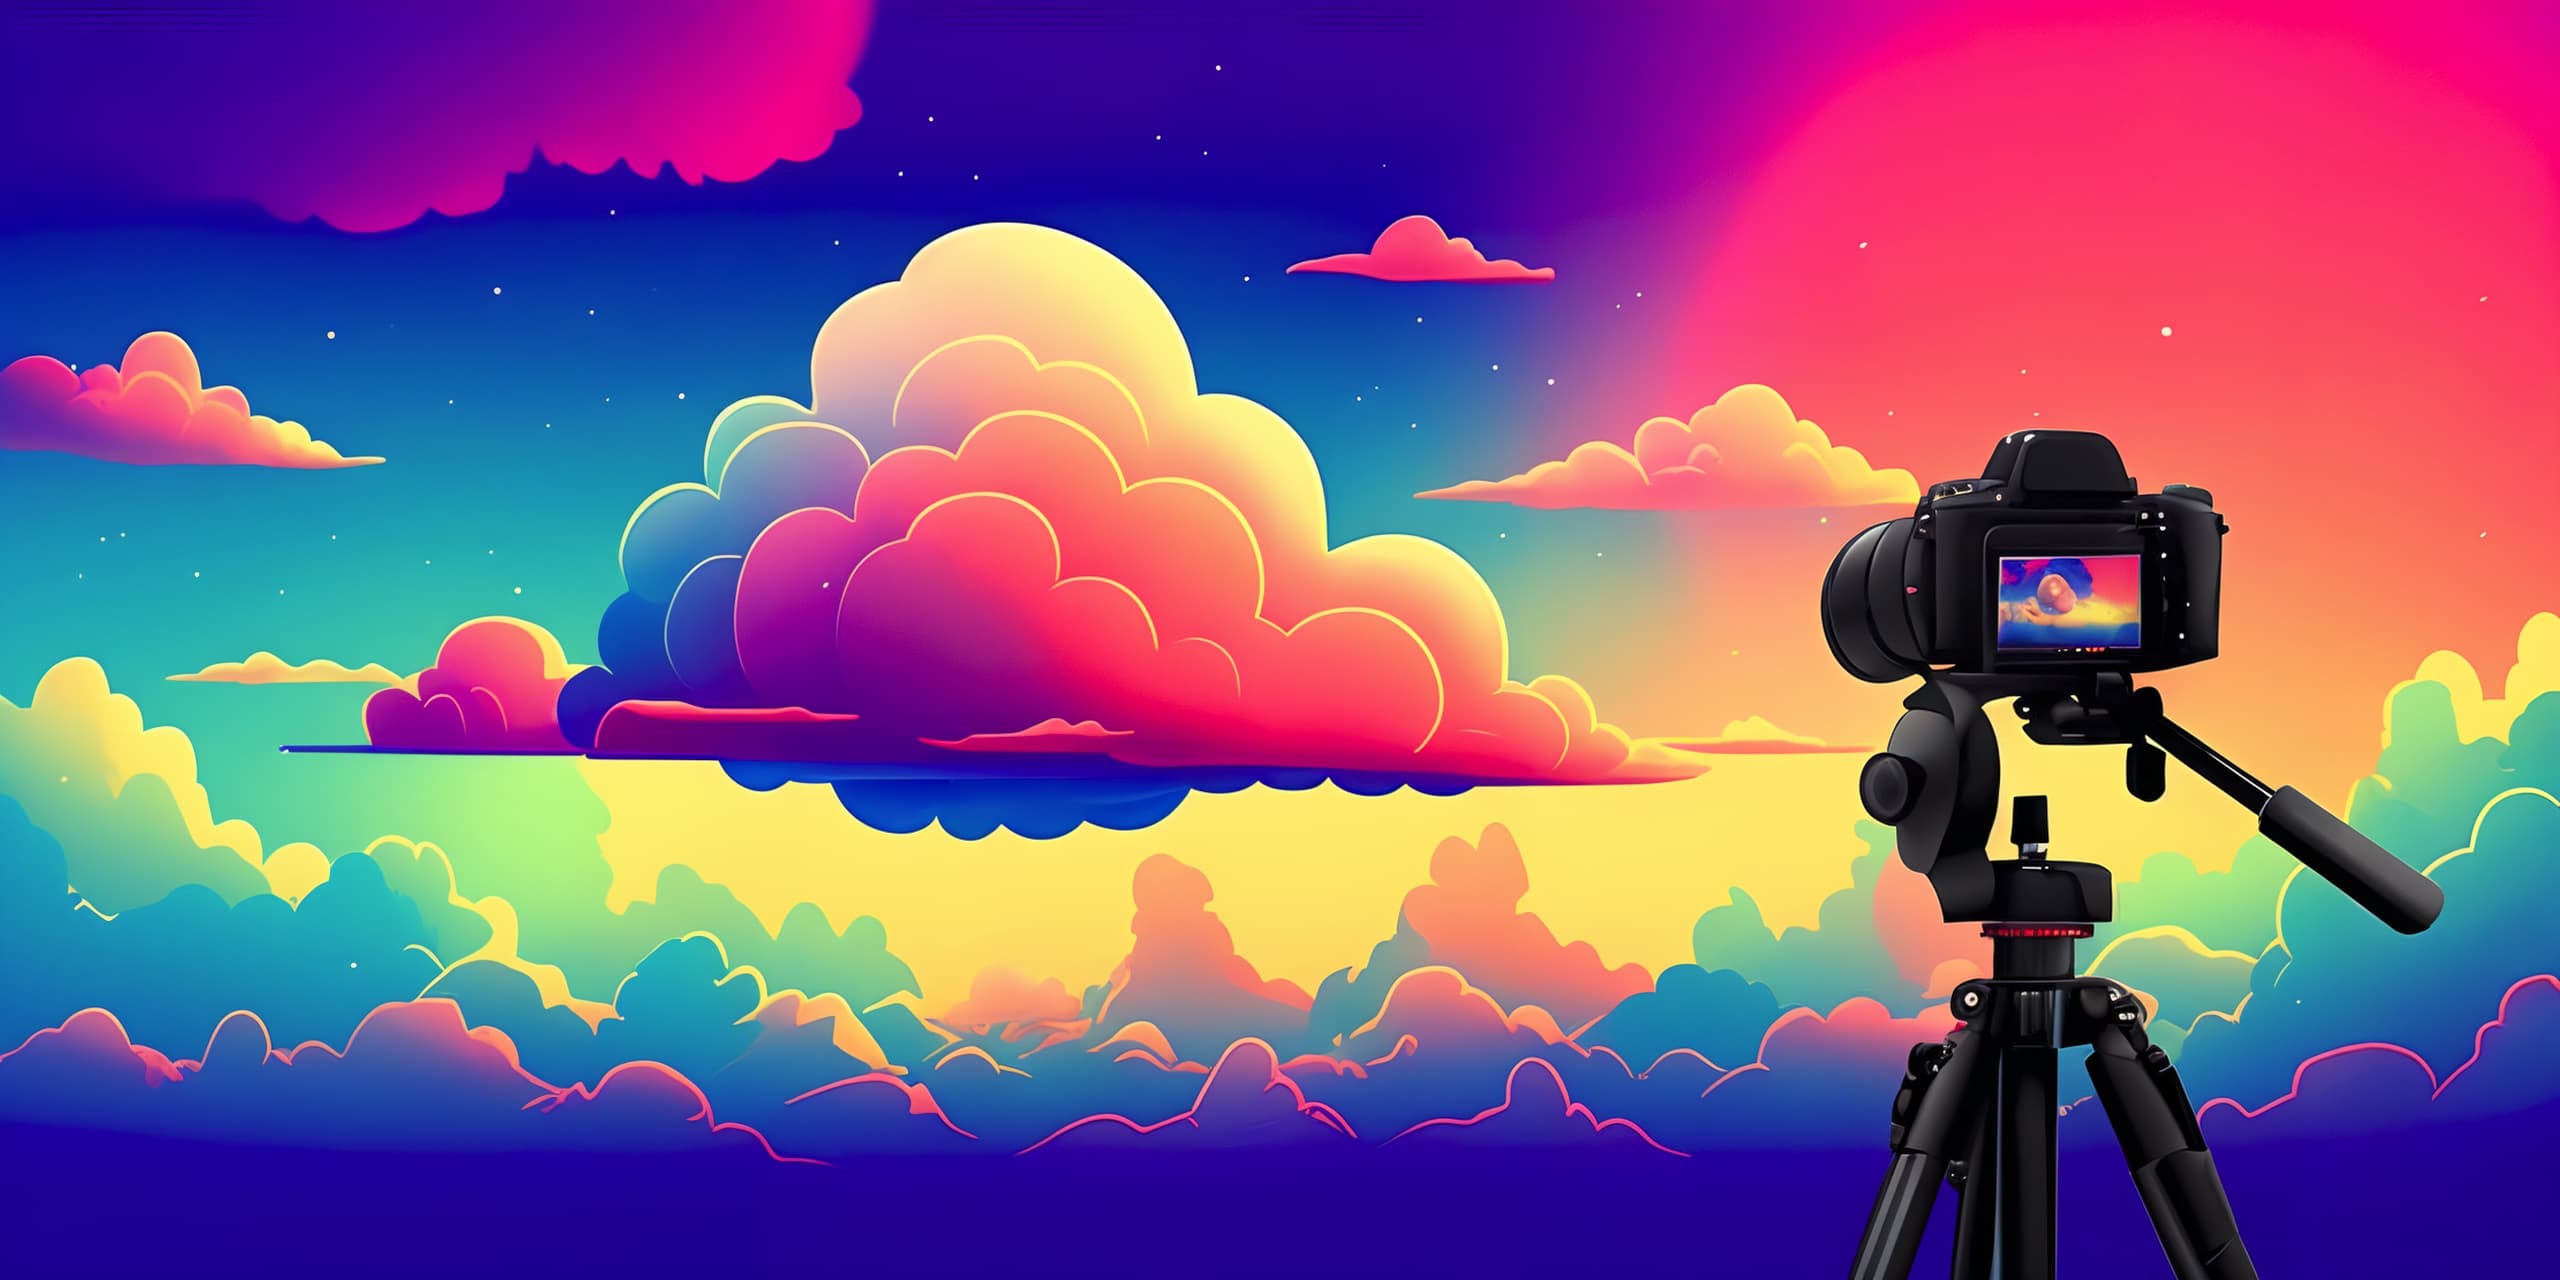 Colorful illustration of a camera on a tripod pointing at a cloud in the sky